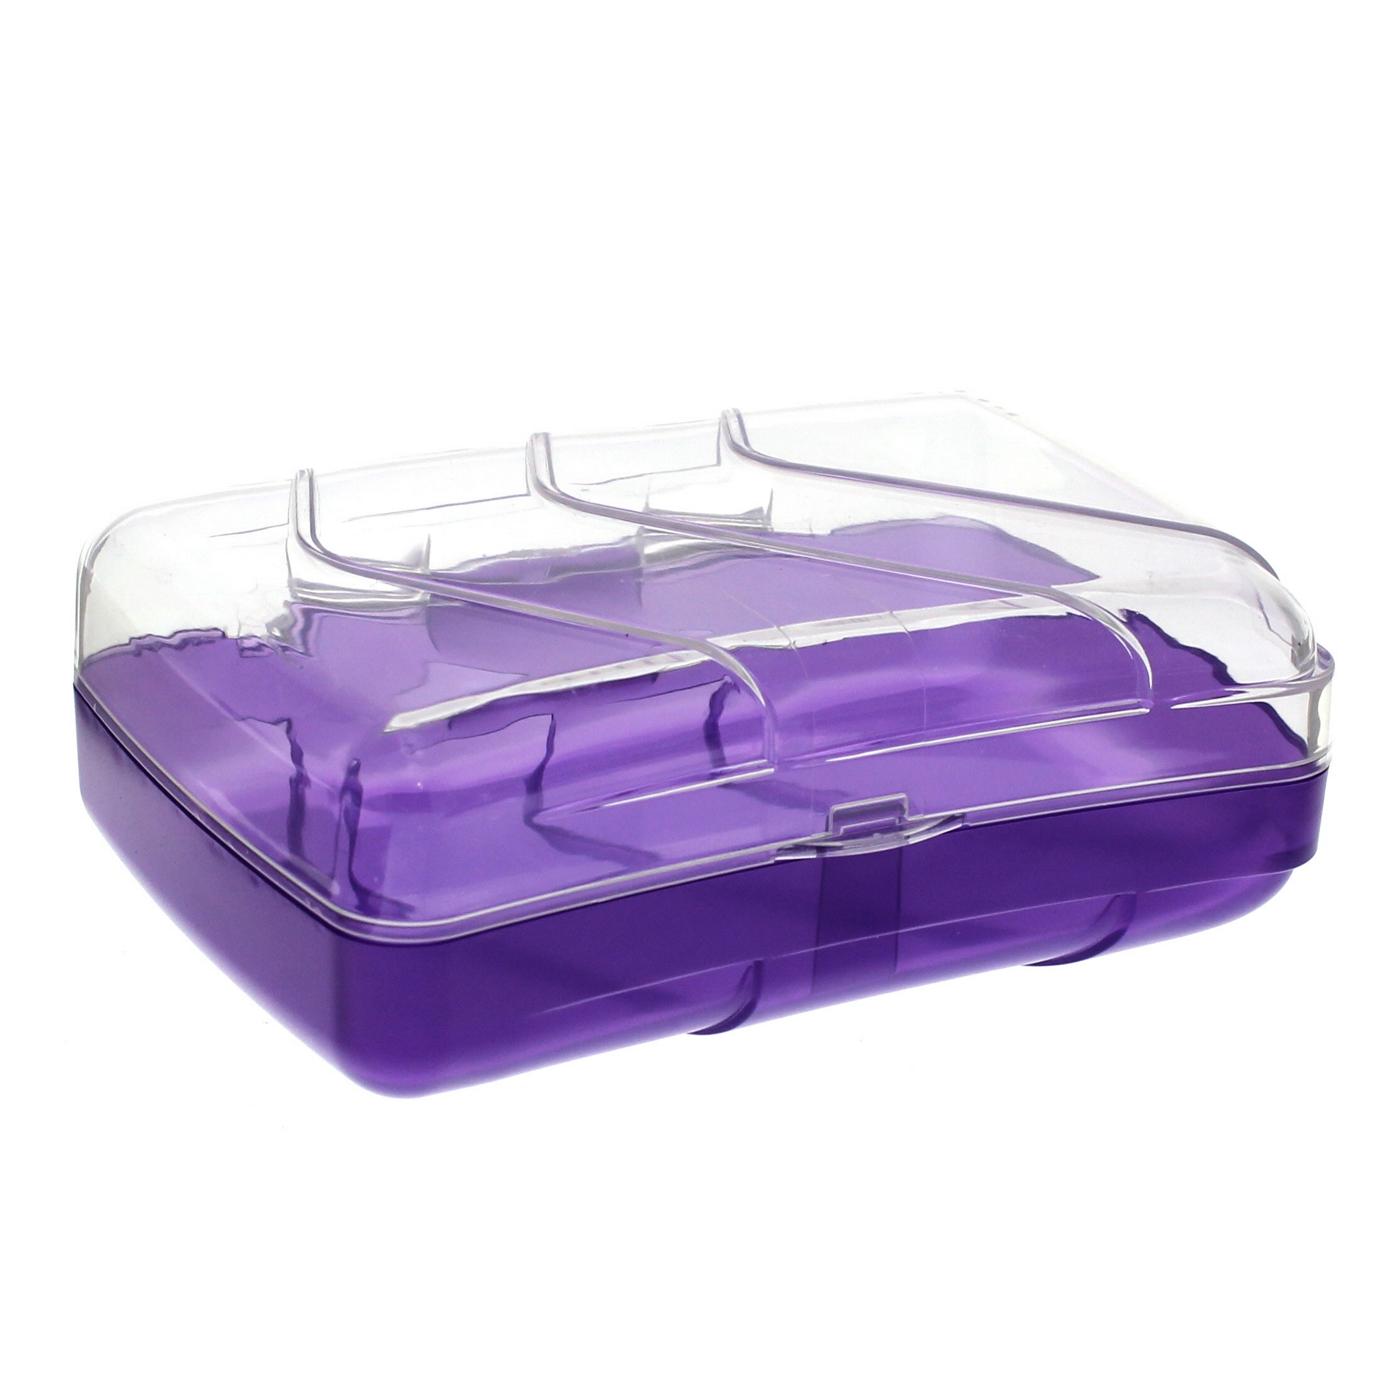 Sprayco Travel Guard Hinged Soap Dish - Assorted; image 5 of 5